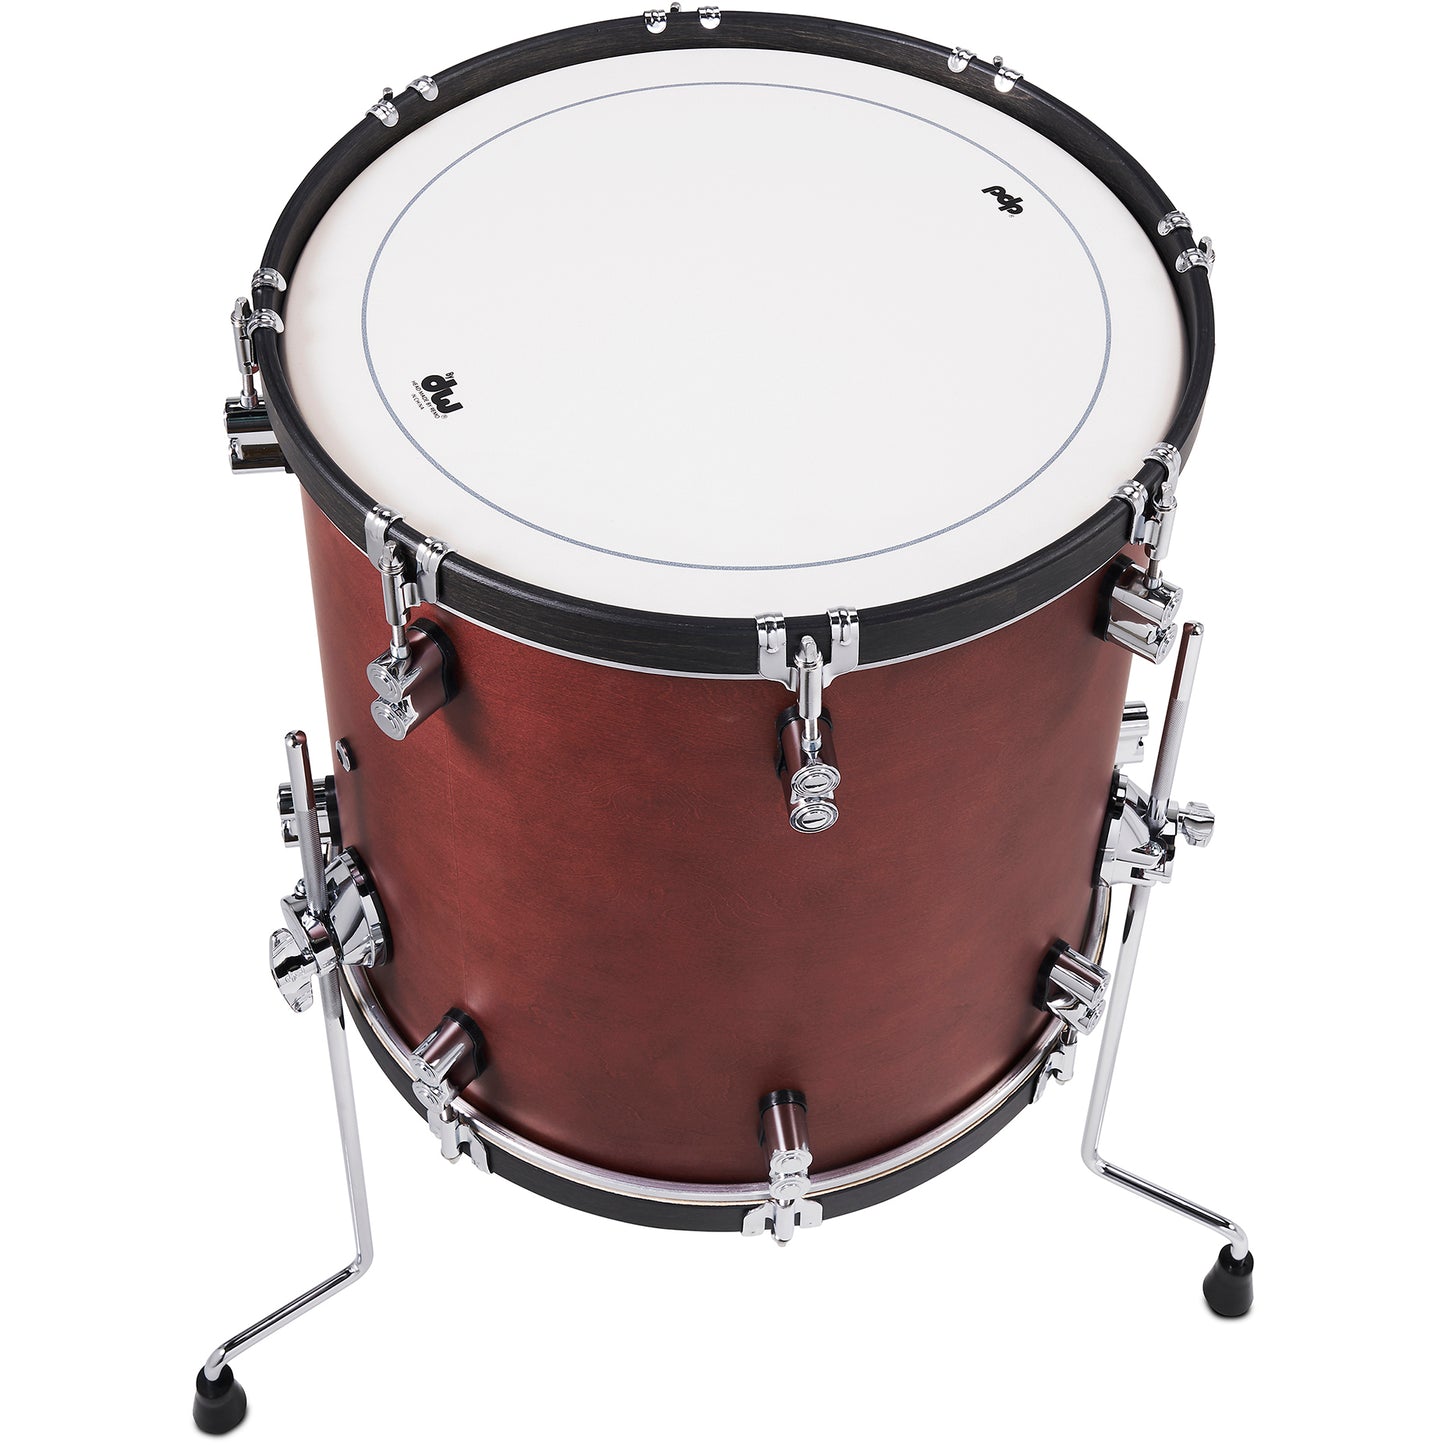 Pacific Drums & Percussion Concept Classic Series 3-Piece Shell Pack - Ox Blood